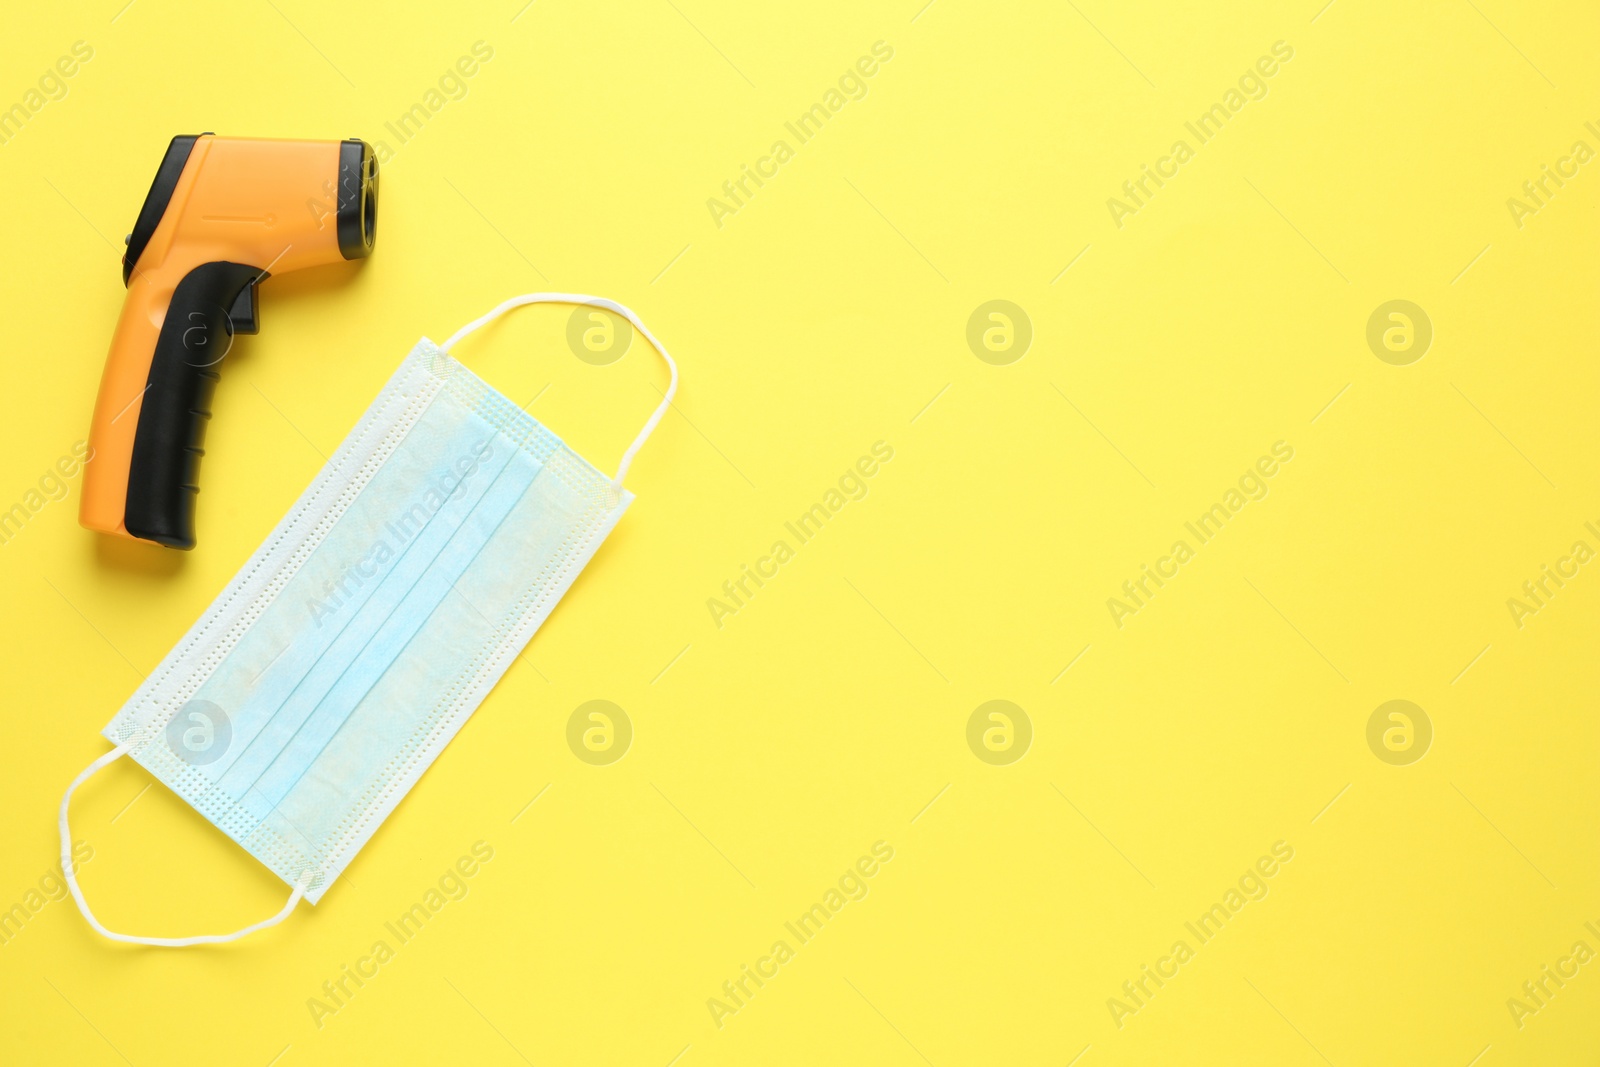 Photo of Infrared thermometer and medical mask on yellow background, flat lay with space for text. Checking temperature during Covid-19 pandemic